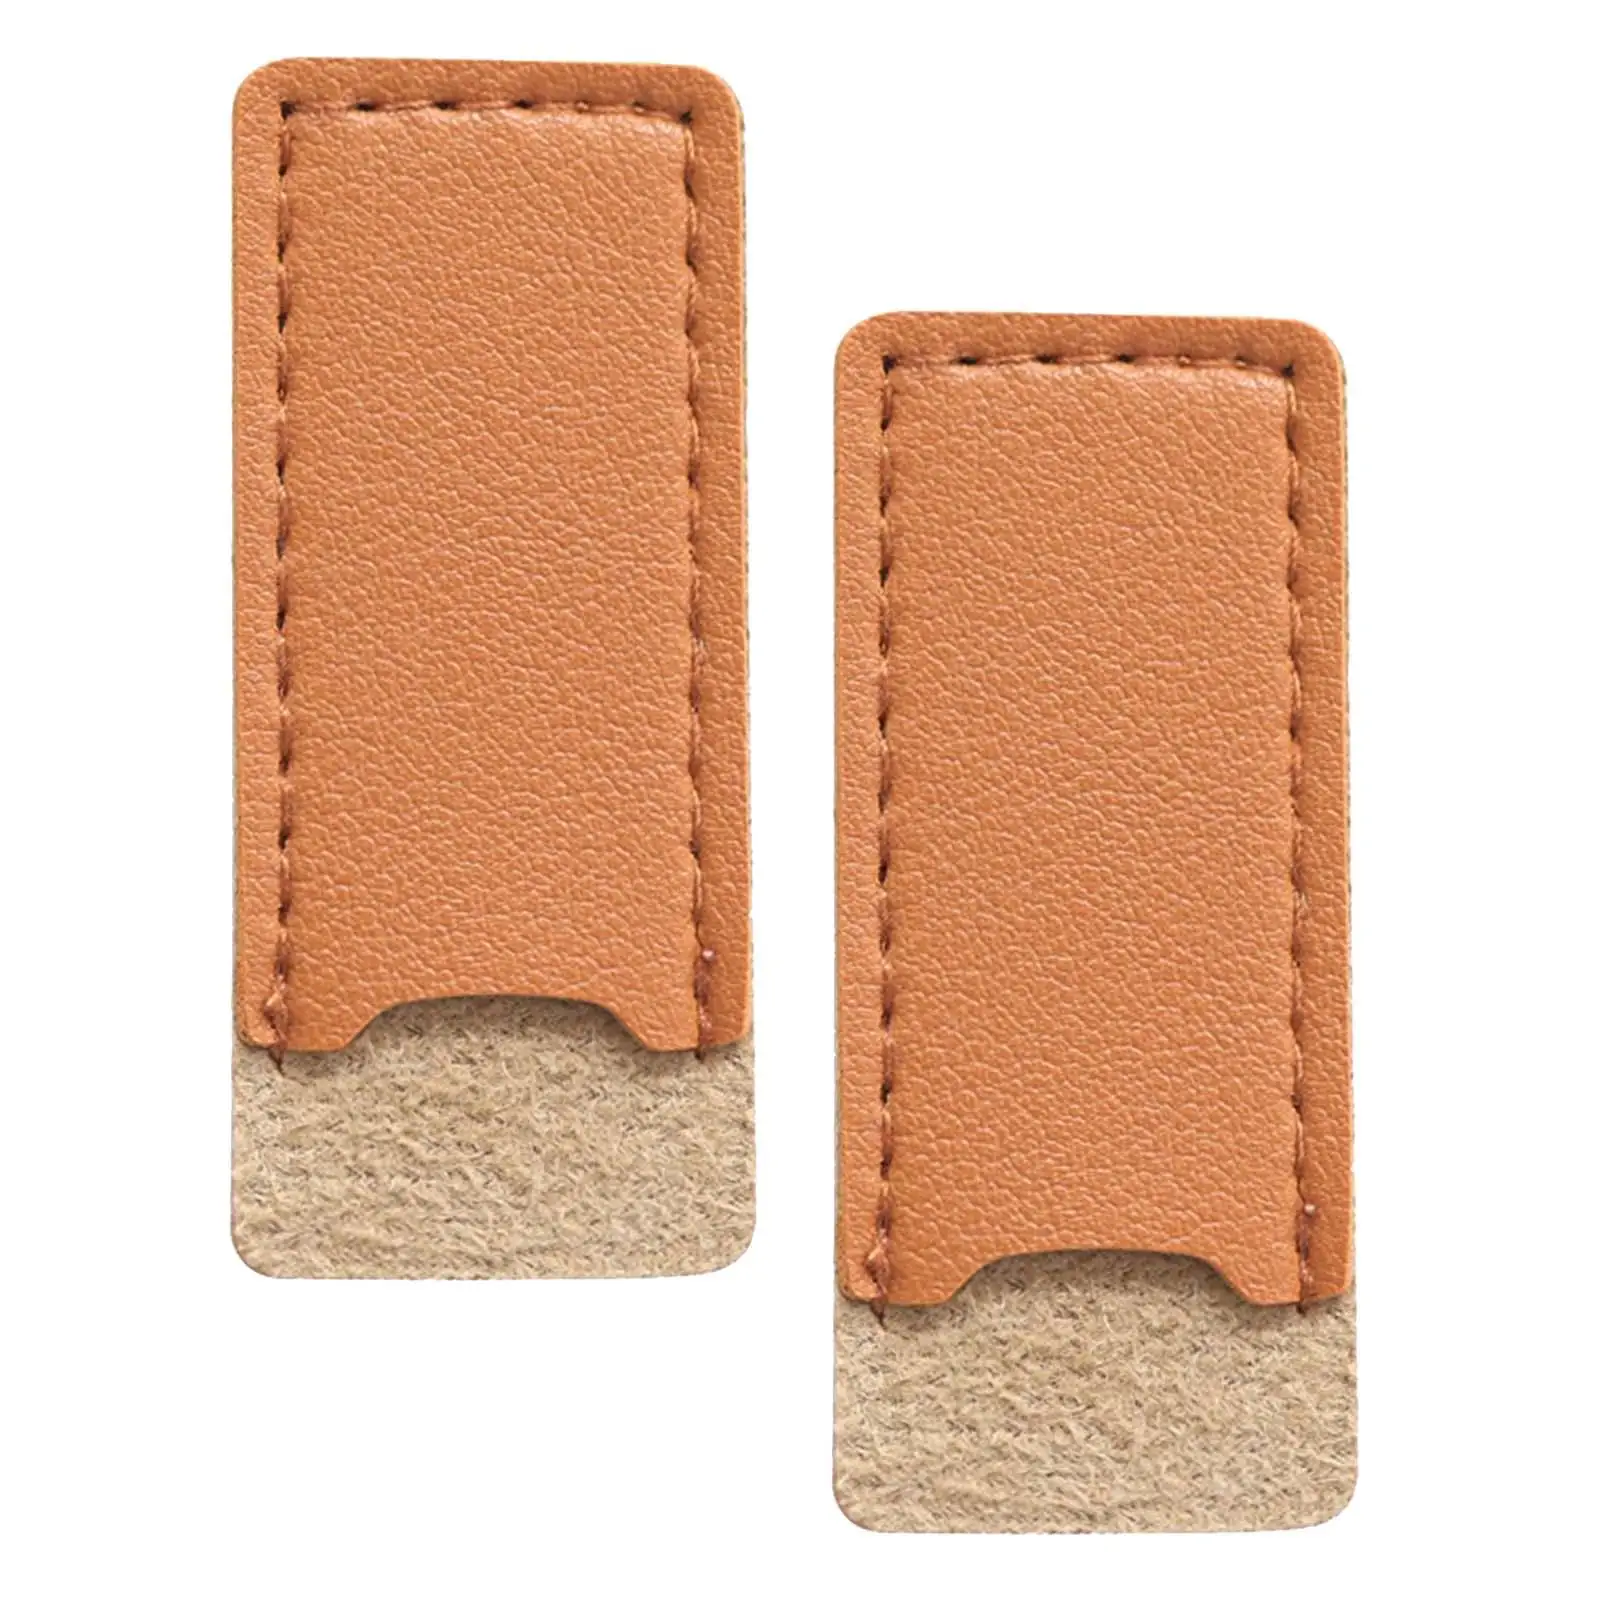 PU Leather Case Lightweight Protective Cover for Sewing Quilting Beauty Tool